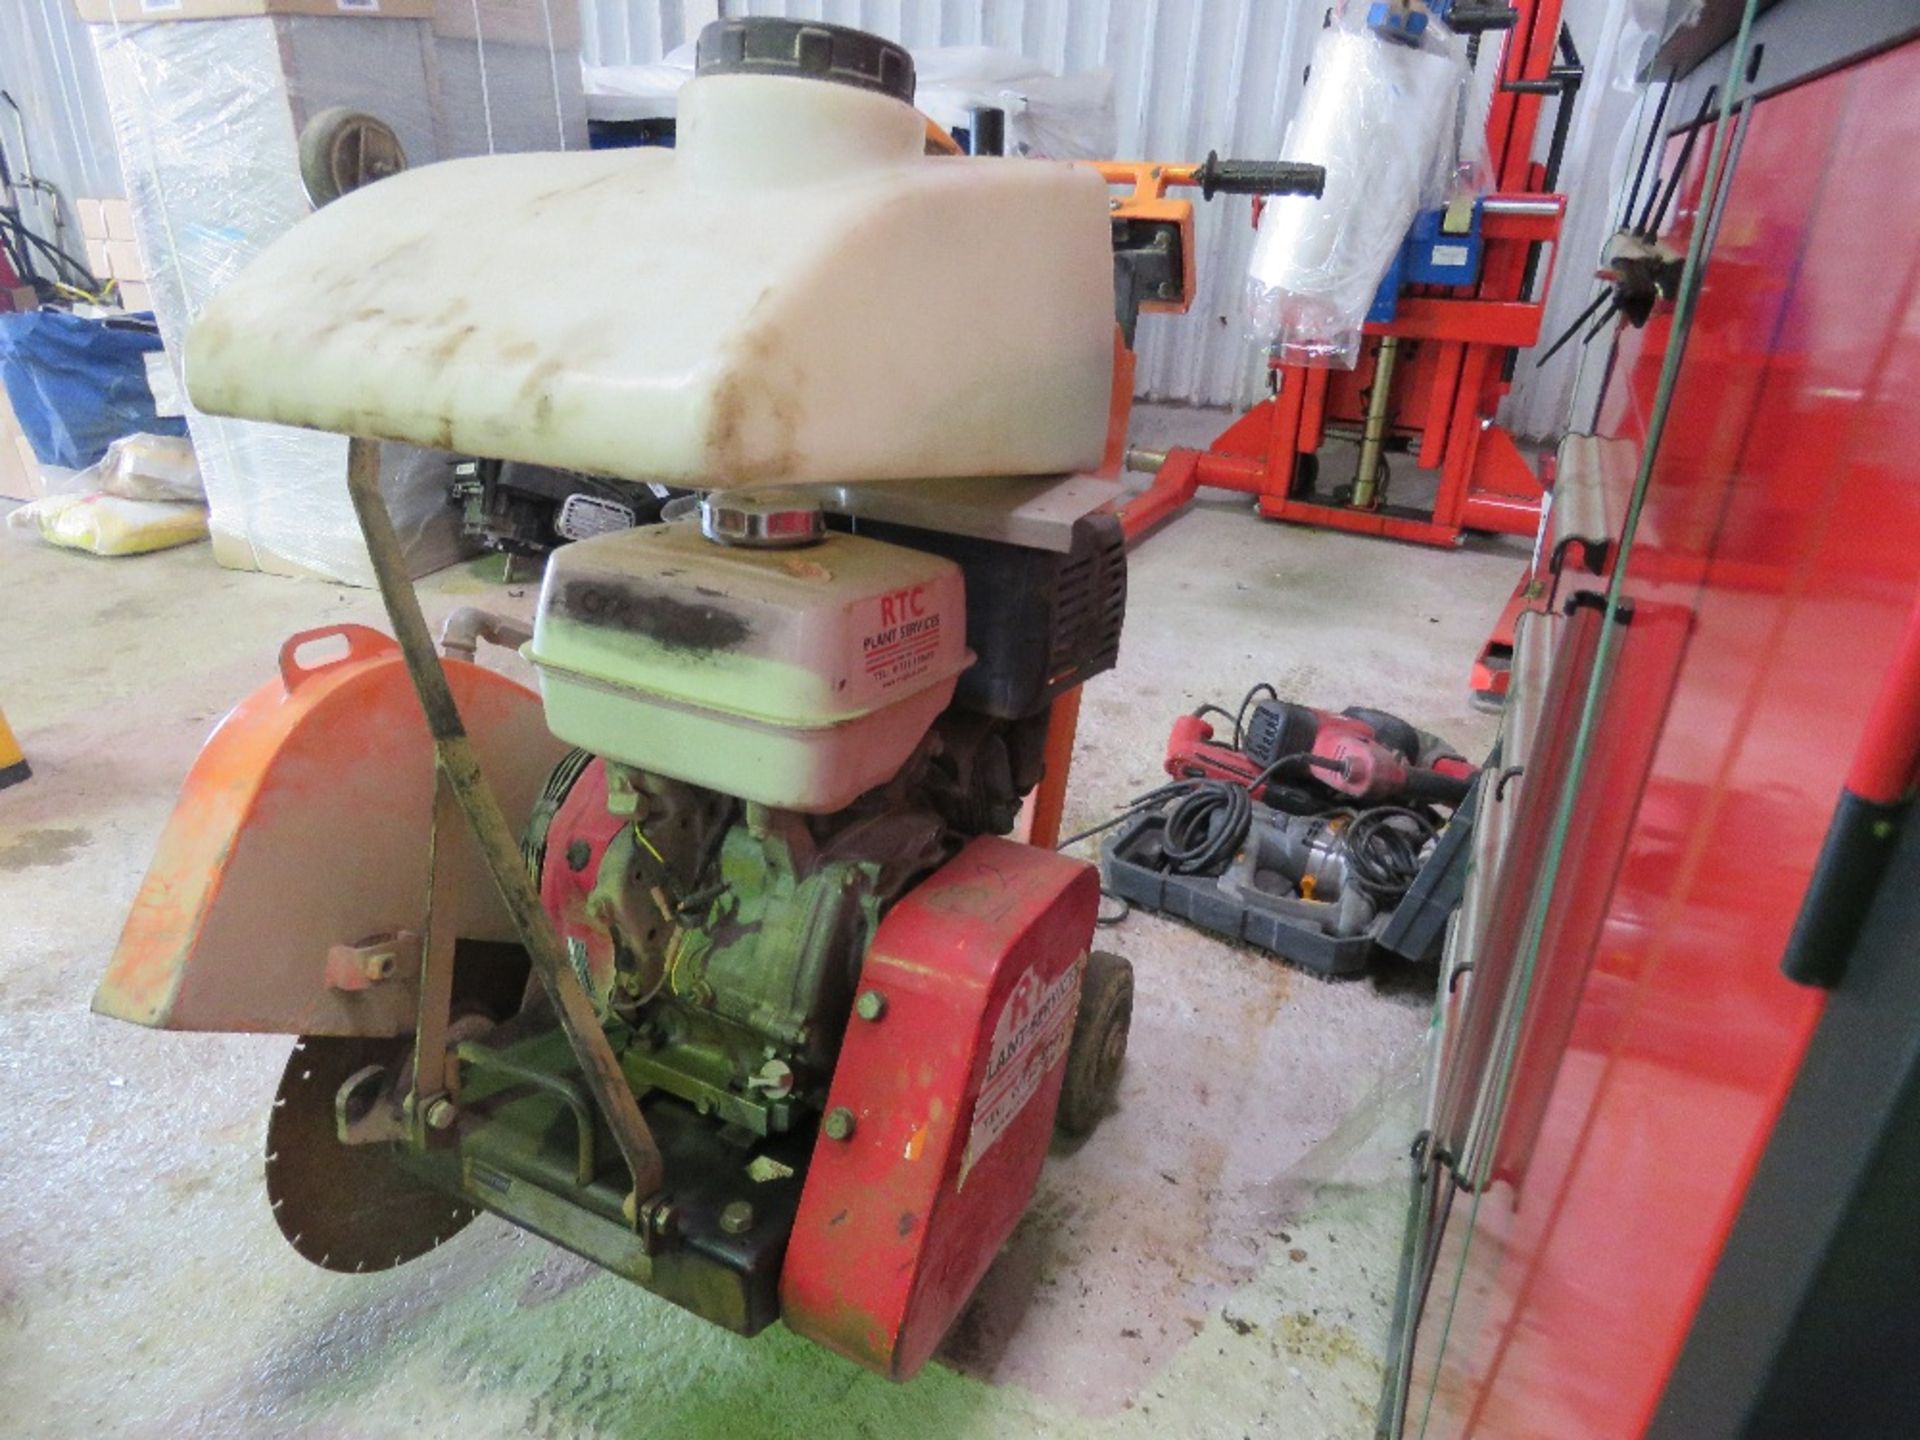 CLIPPER PETROL ENGINED FLOOR SAW WITH TANK AND BLADE. THIS LOT IS SOLD UNDER THE AUCTIONEERS MARGIN - Image 3 of 4